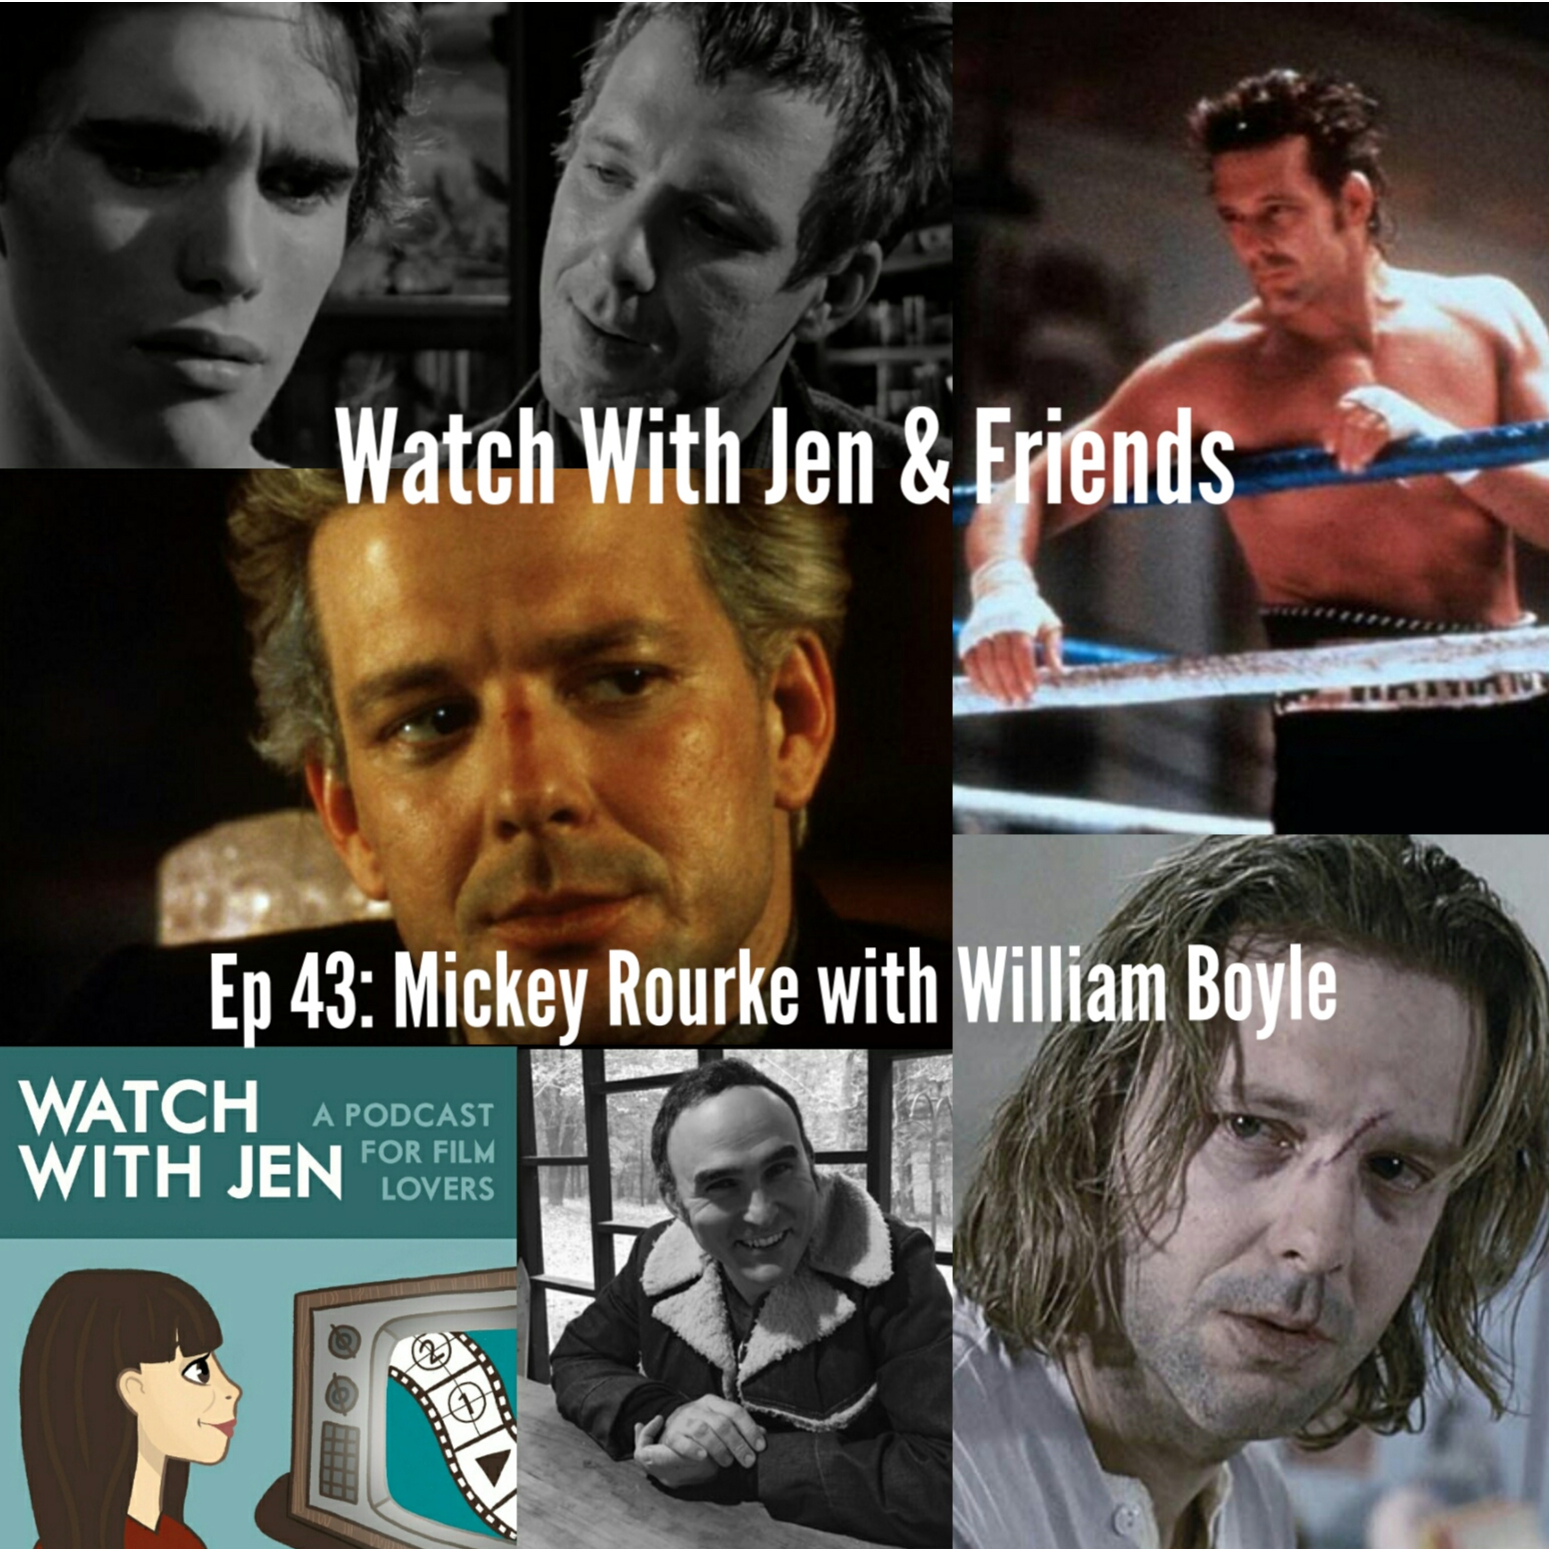 Watch With Jen & Friends: Episode 43 - Mickey Rourke with William Boyle